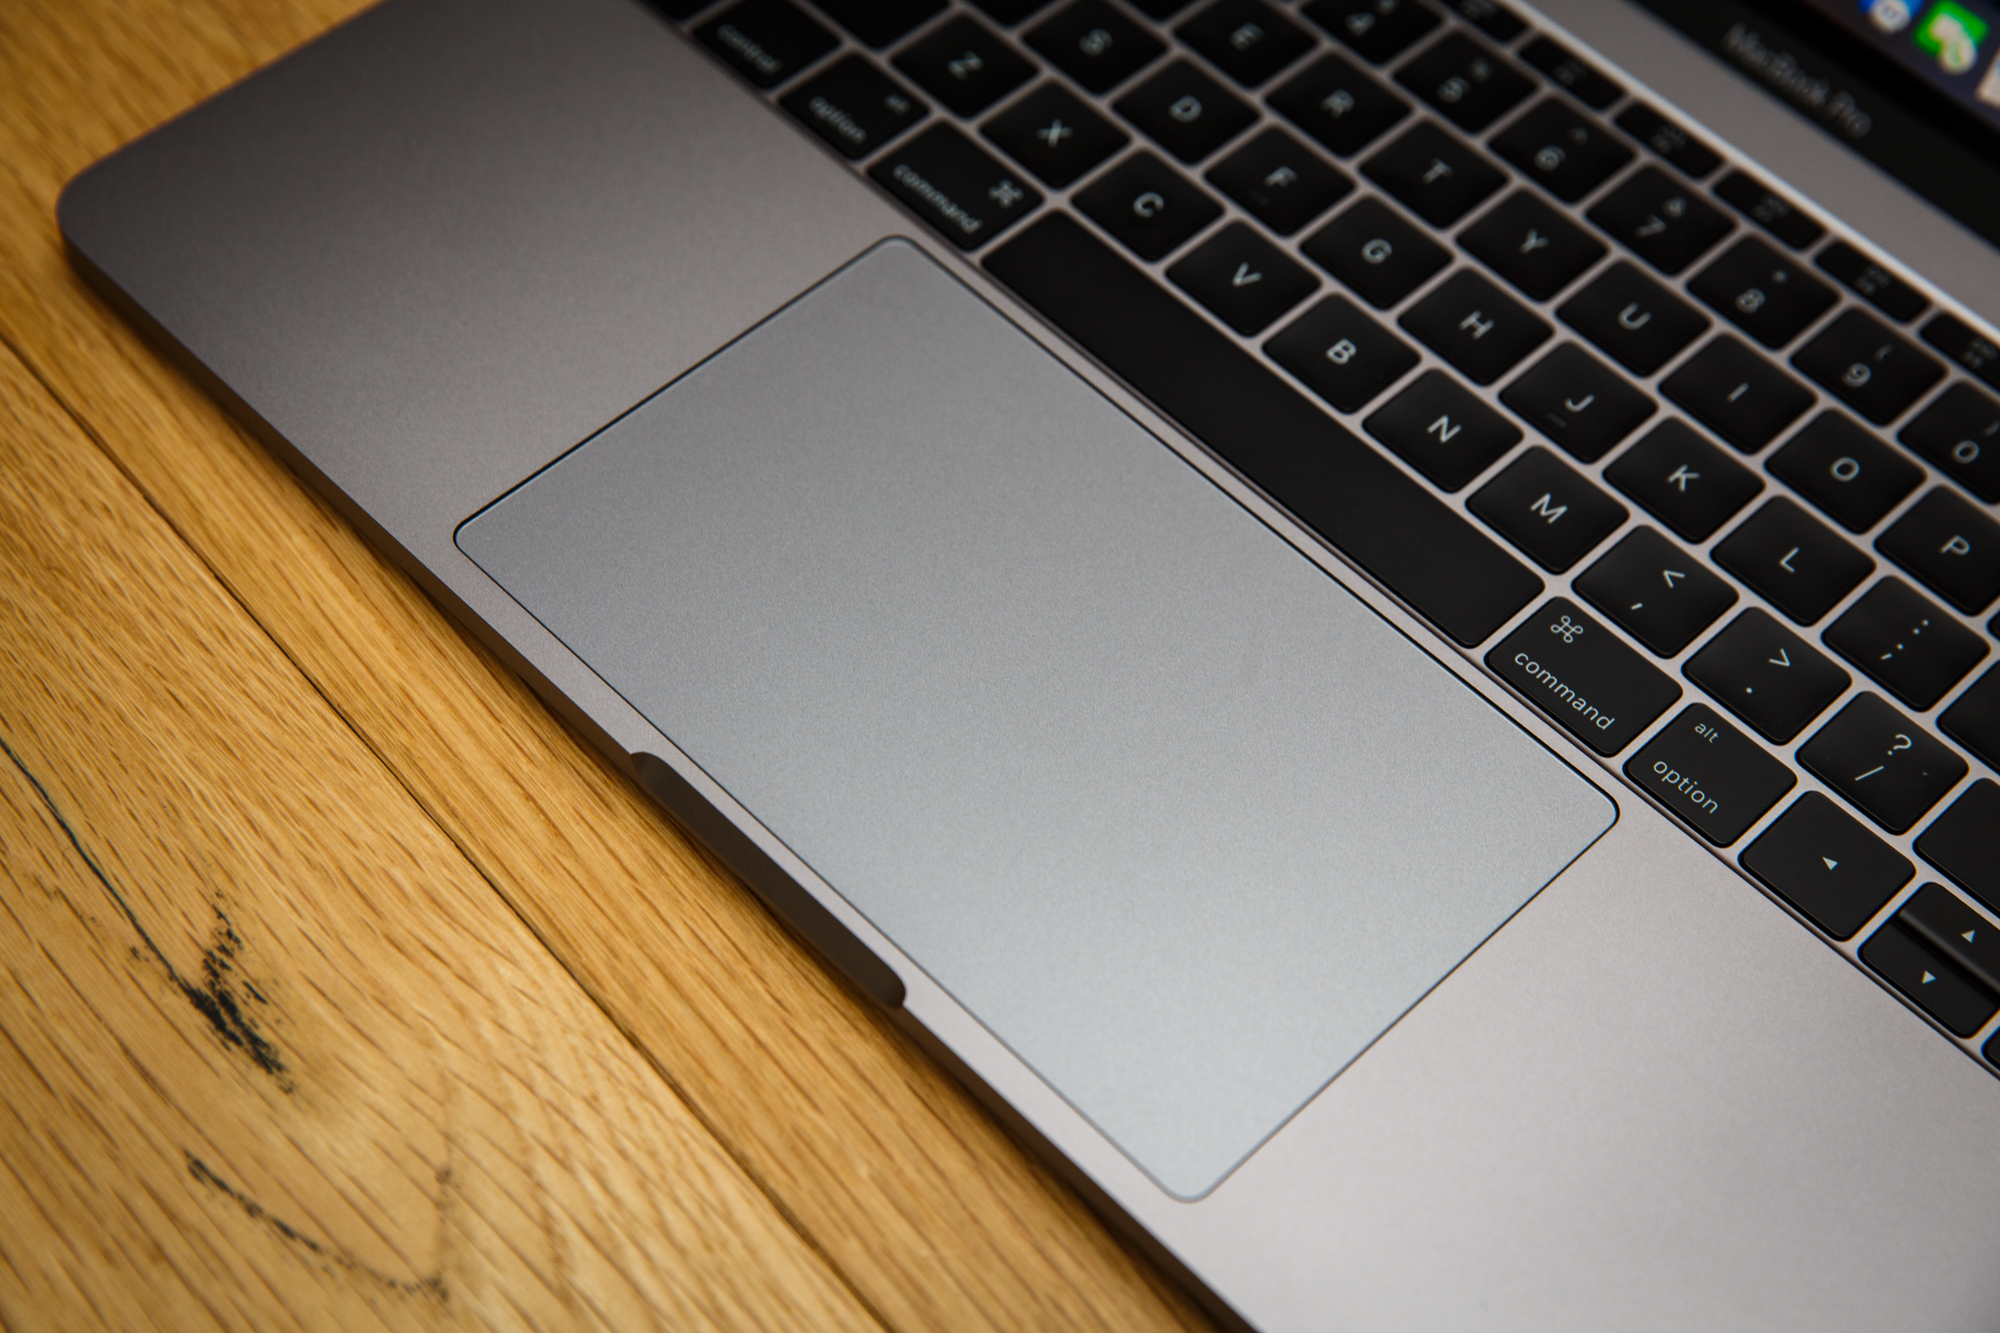 Apple MacBook Pro review (13-inch, 2016): This is basically the 